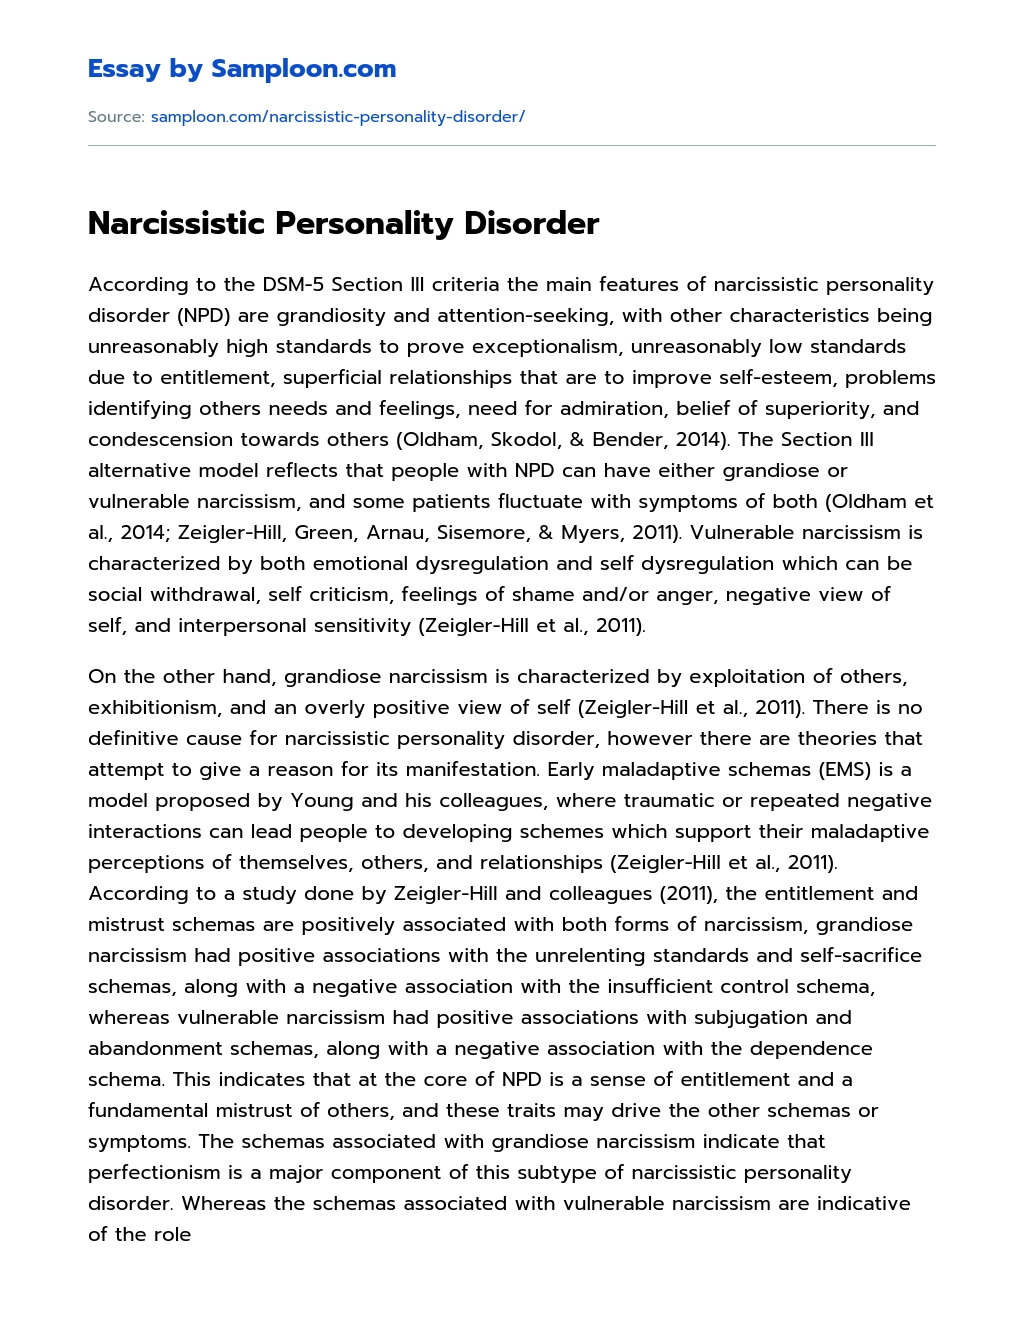 Narcissistic Personality Disorder essay